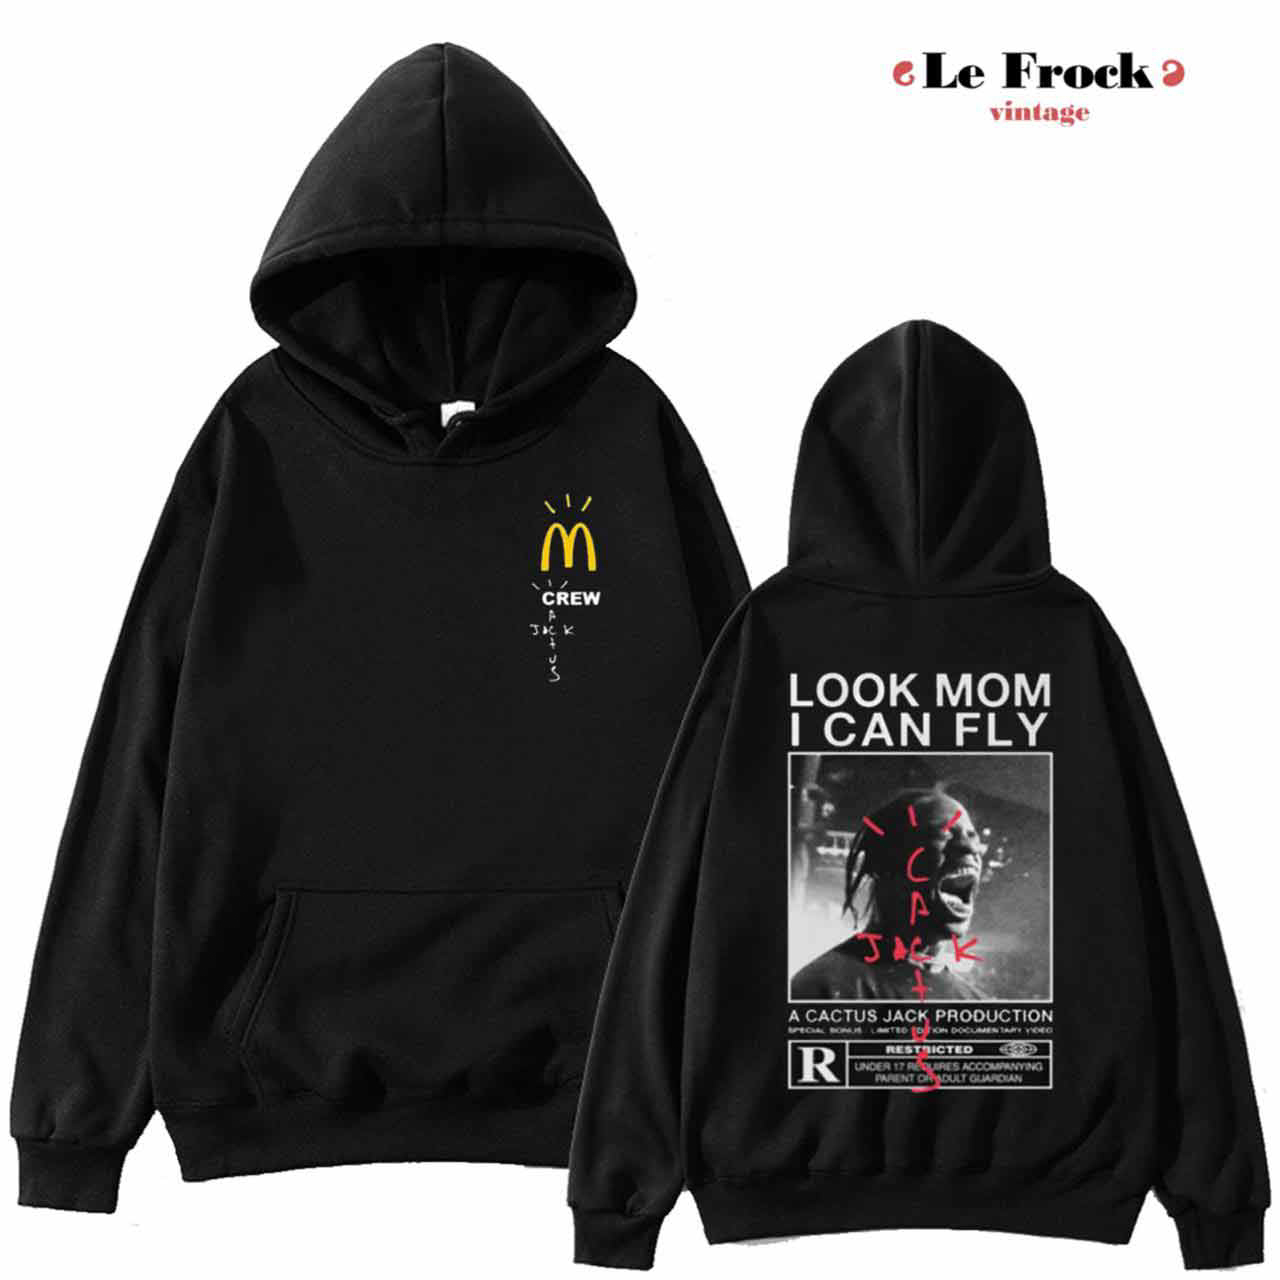 Mcdonalds Crew And Look Mom I Can Fly Hoodie